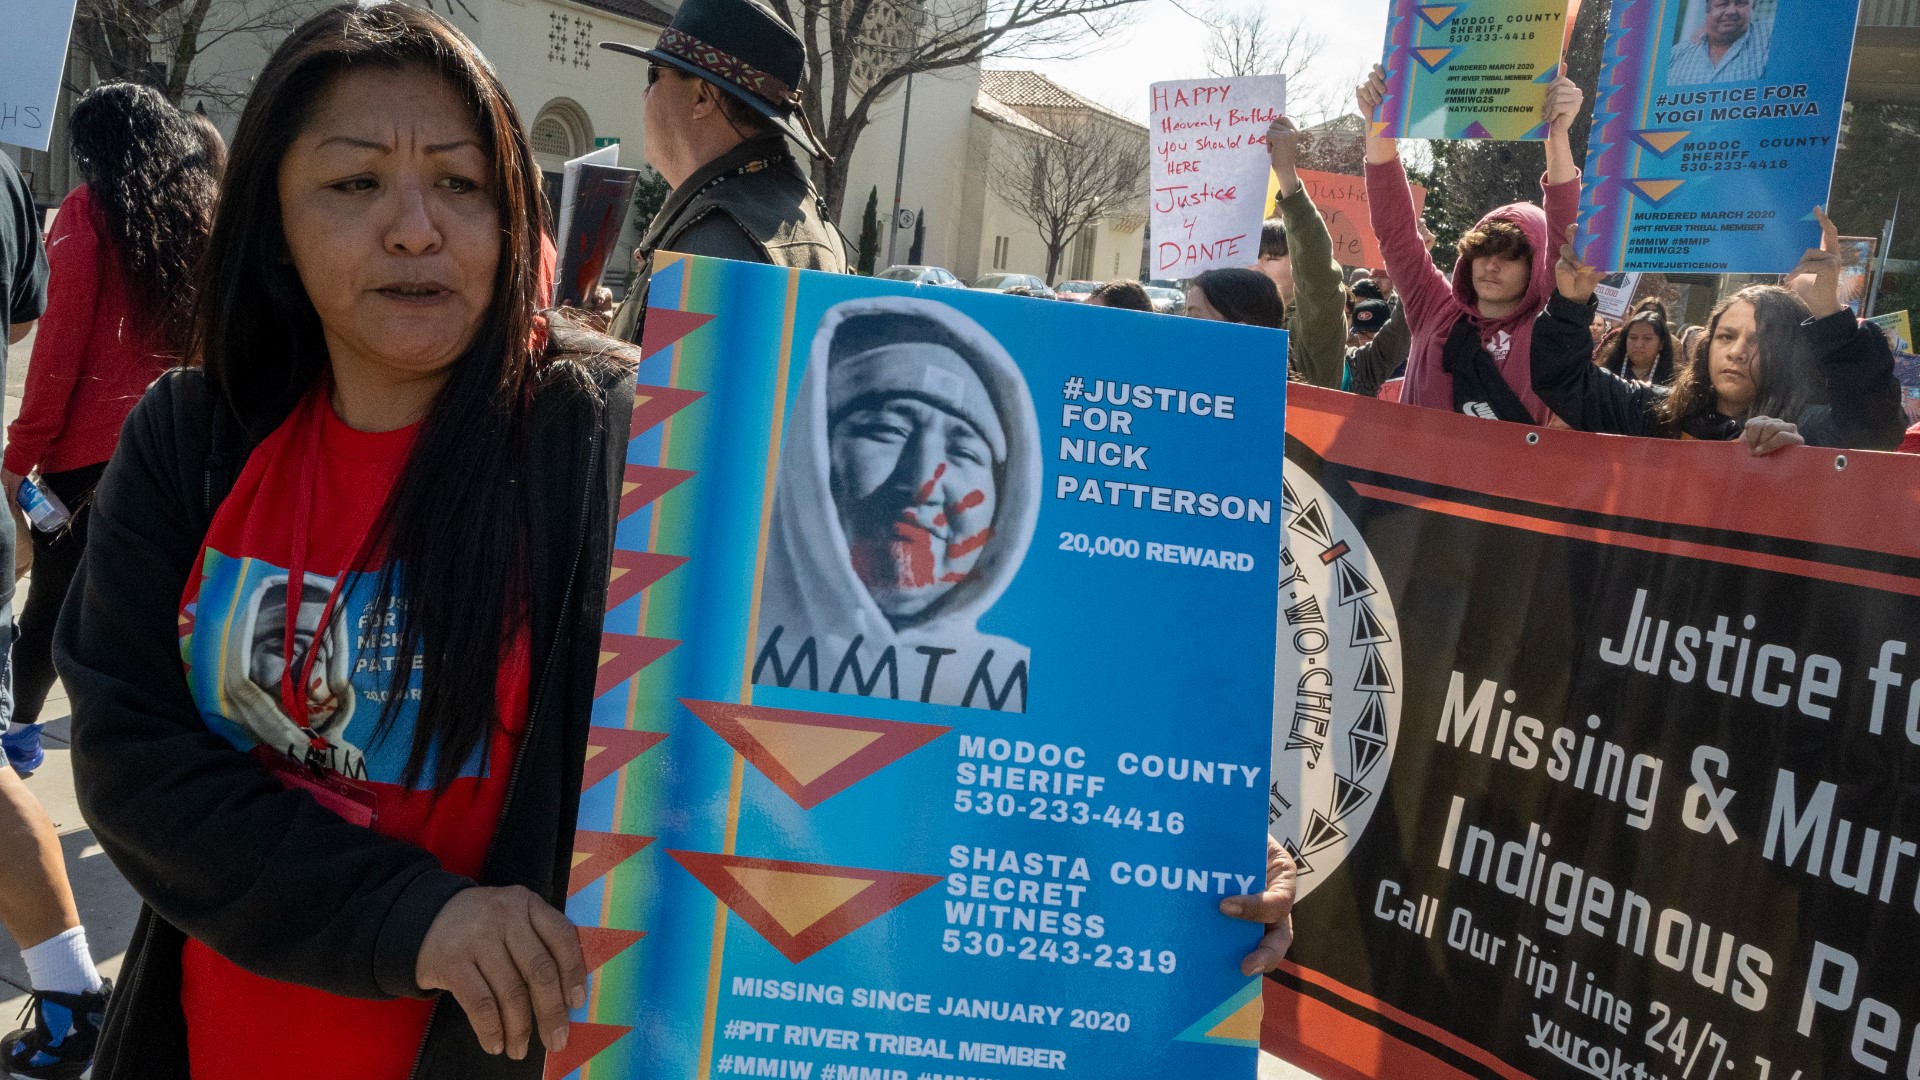 Native American tribes are calling on lawmakers and law enforcement to address the high rates of missing-person cases and unsolved killings in Indian Country.